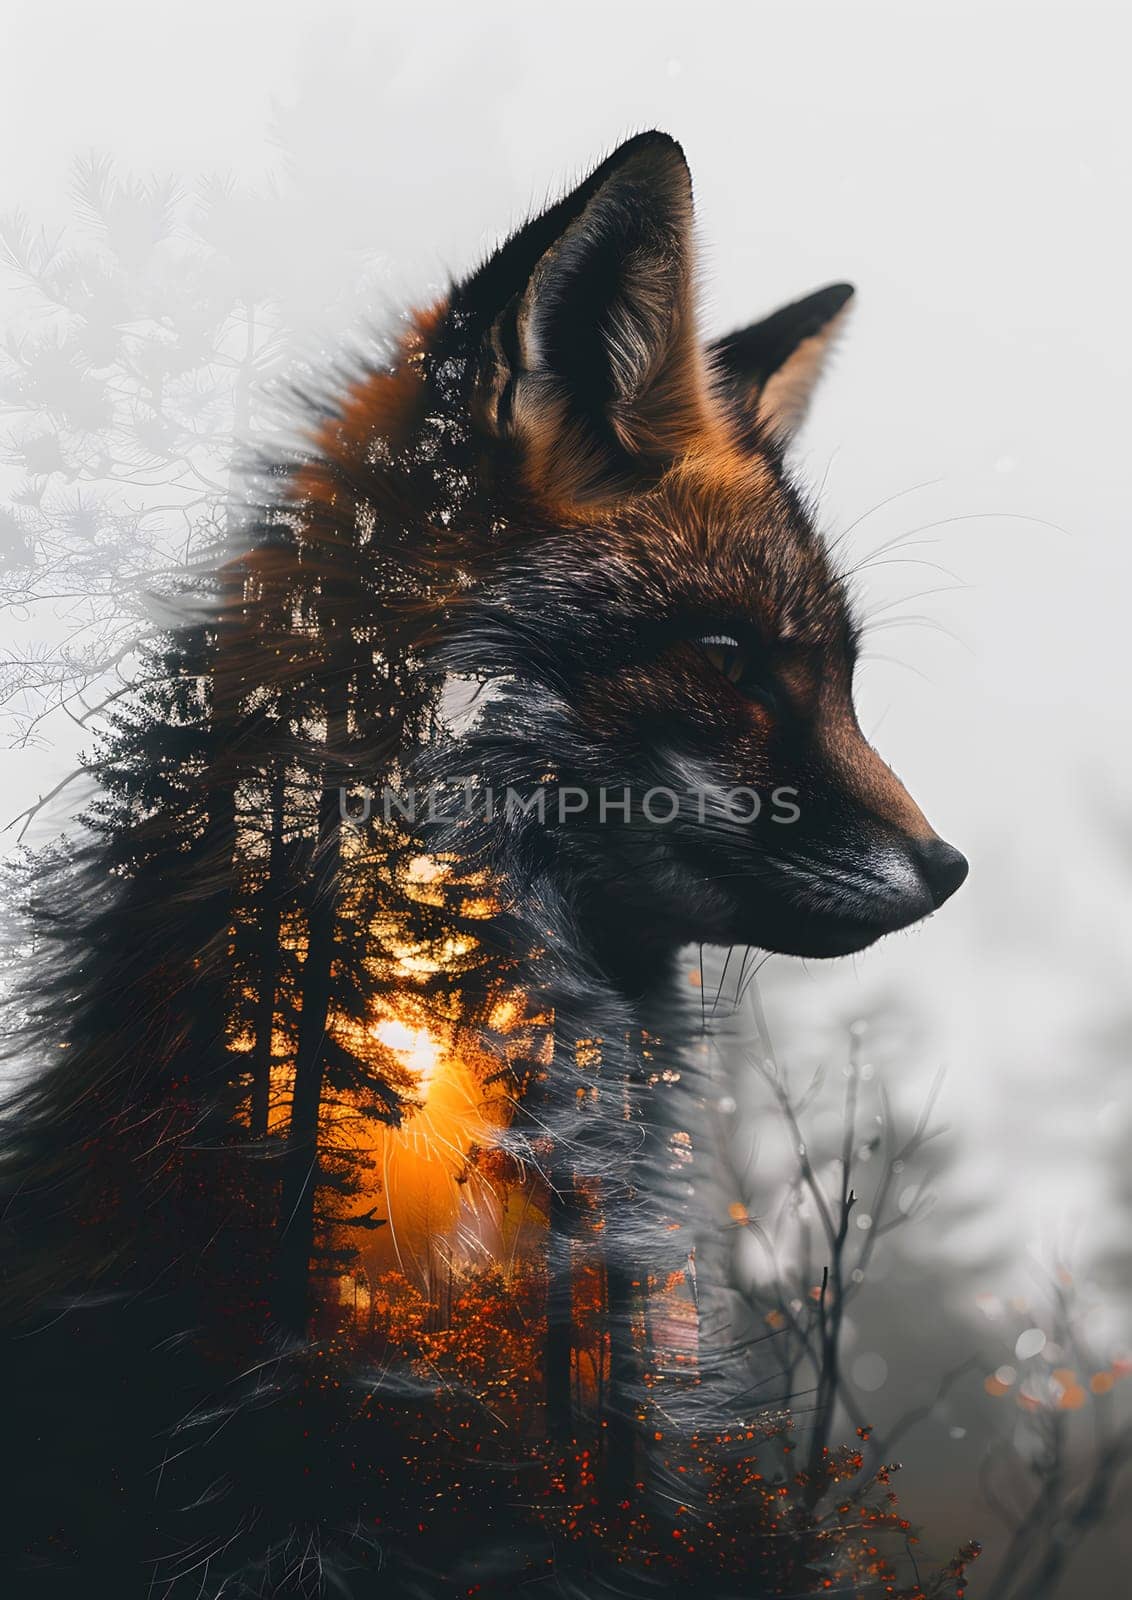 A double exposure image featuring a Dog breed, possibly a German shepherd dog, superimposed with a forest scene, showcasing the Carnivore, Terrestrial animal characteristics of this breed